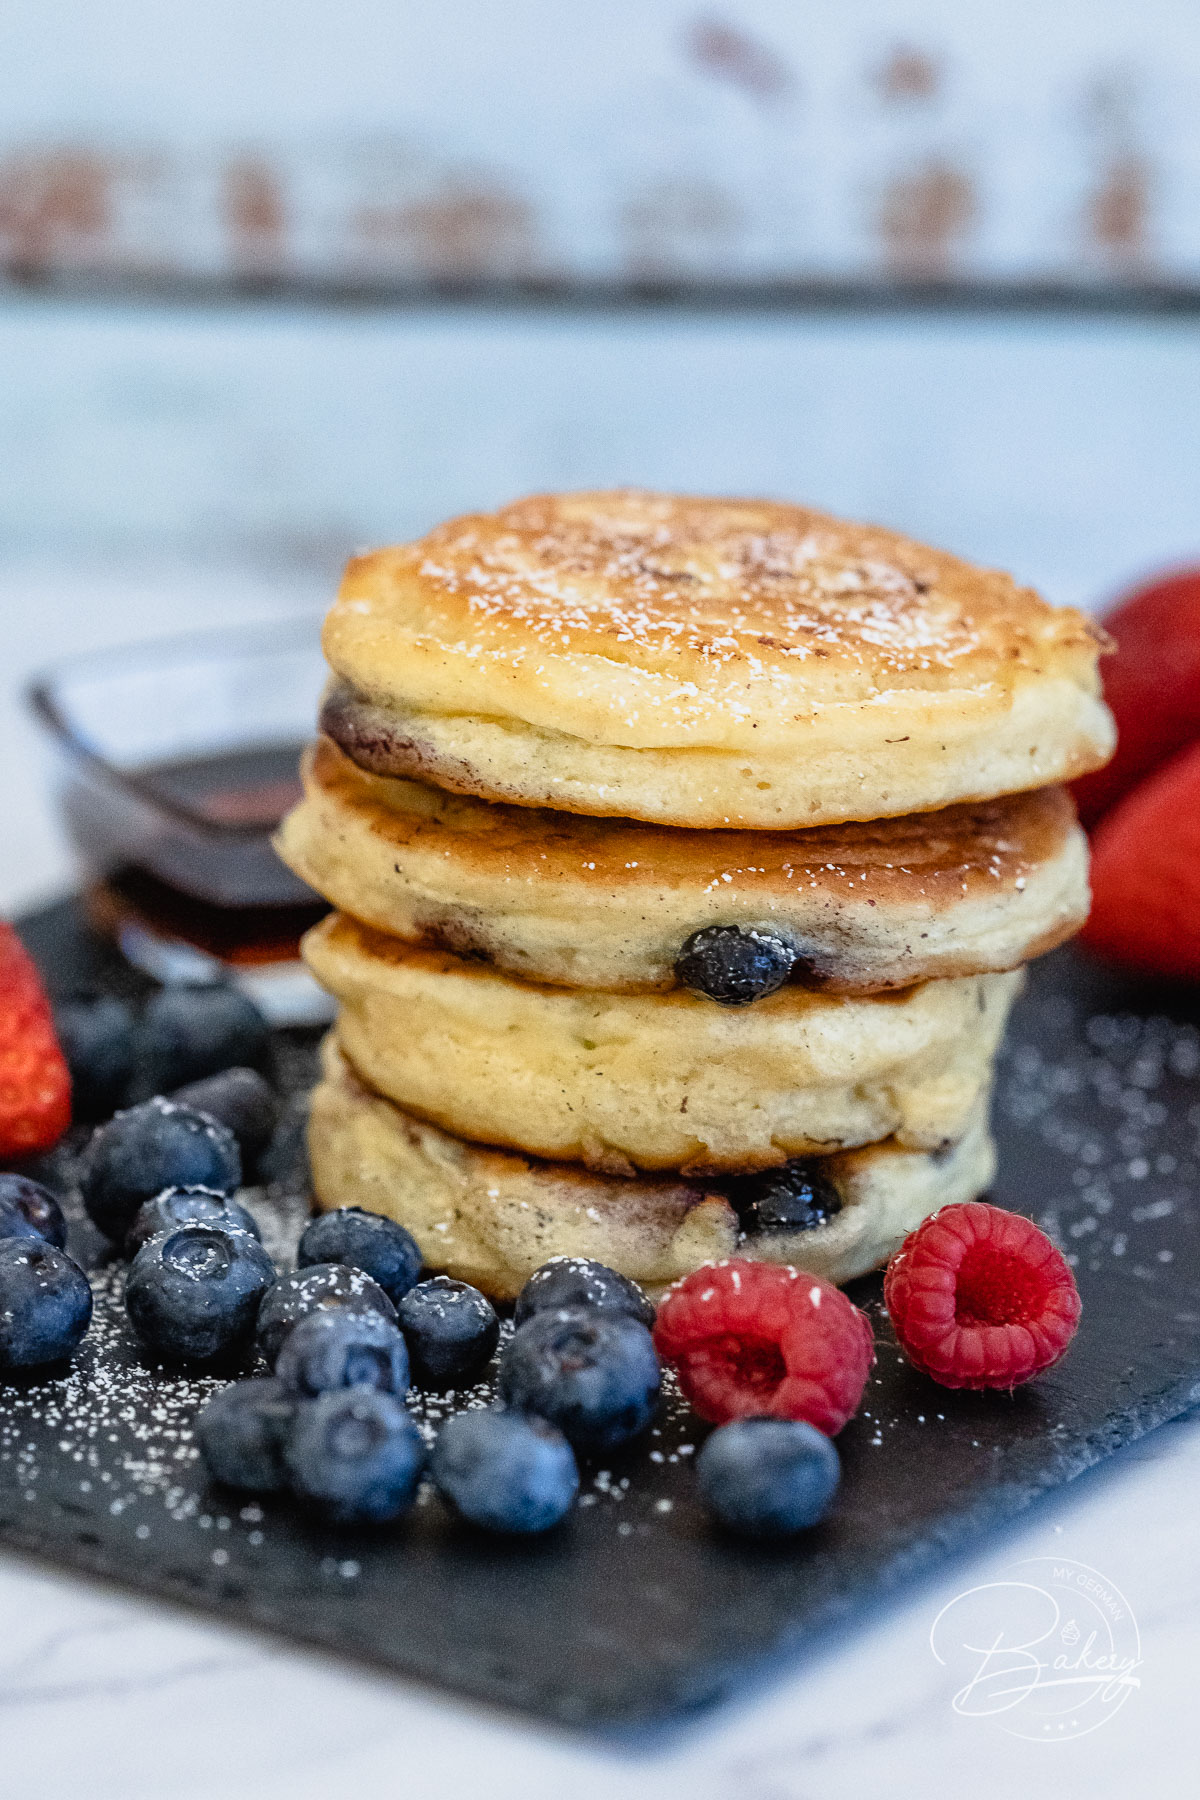 Easy blueberry pancakes recipe - delicious thick little pancakes and thick Crêpes - blueberry pancakes - easy fluffy and quick to make - American blueberry pancakes and little pancakes - blueberry pancakes recipe with blueberries. Breakfast with homemade pancakes